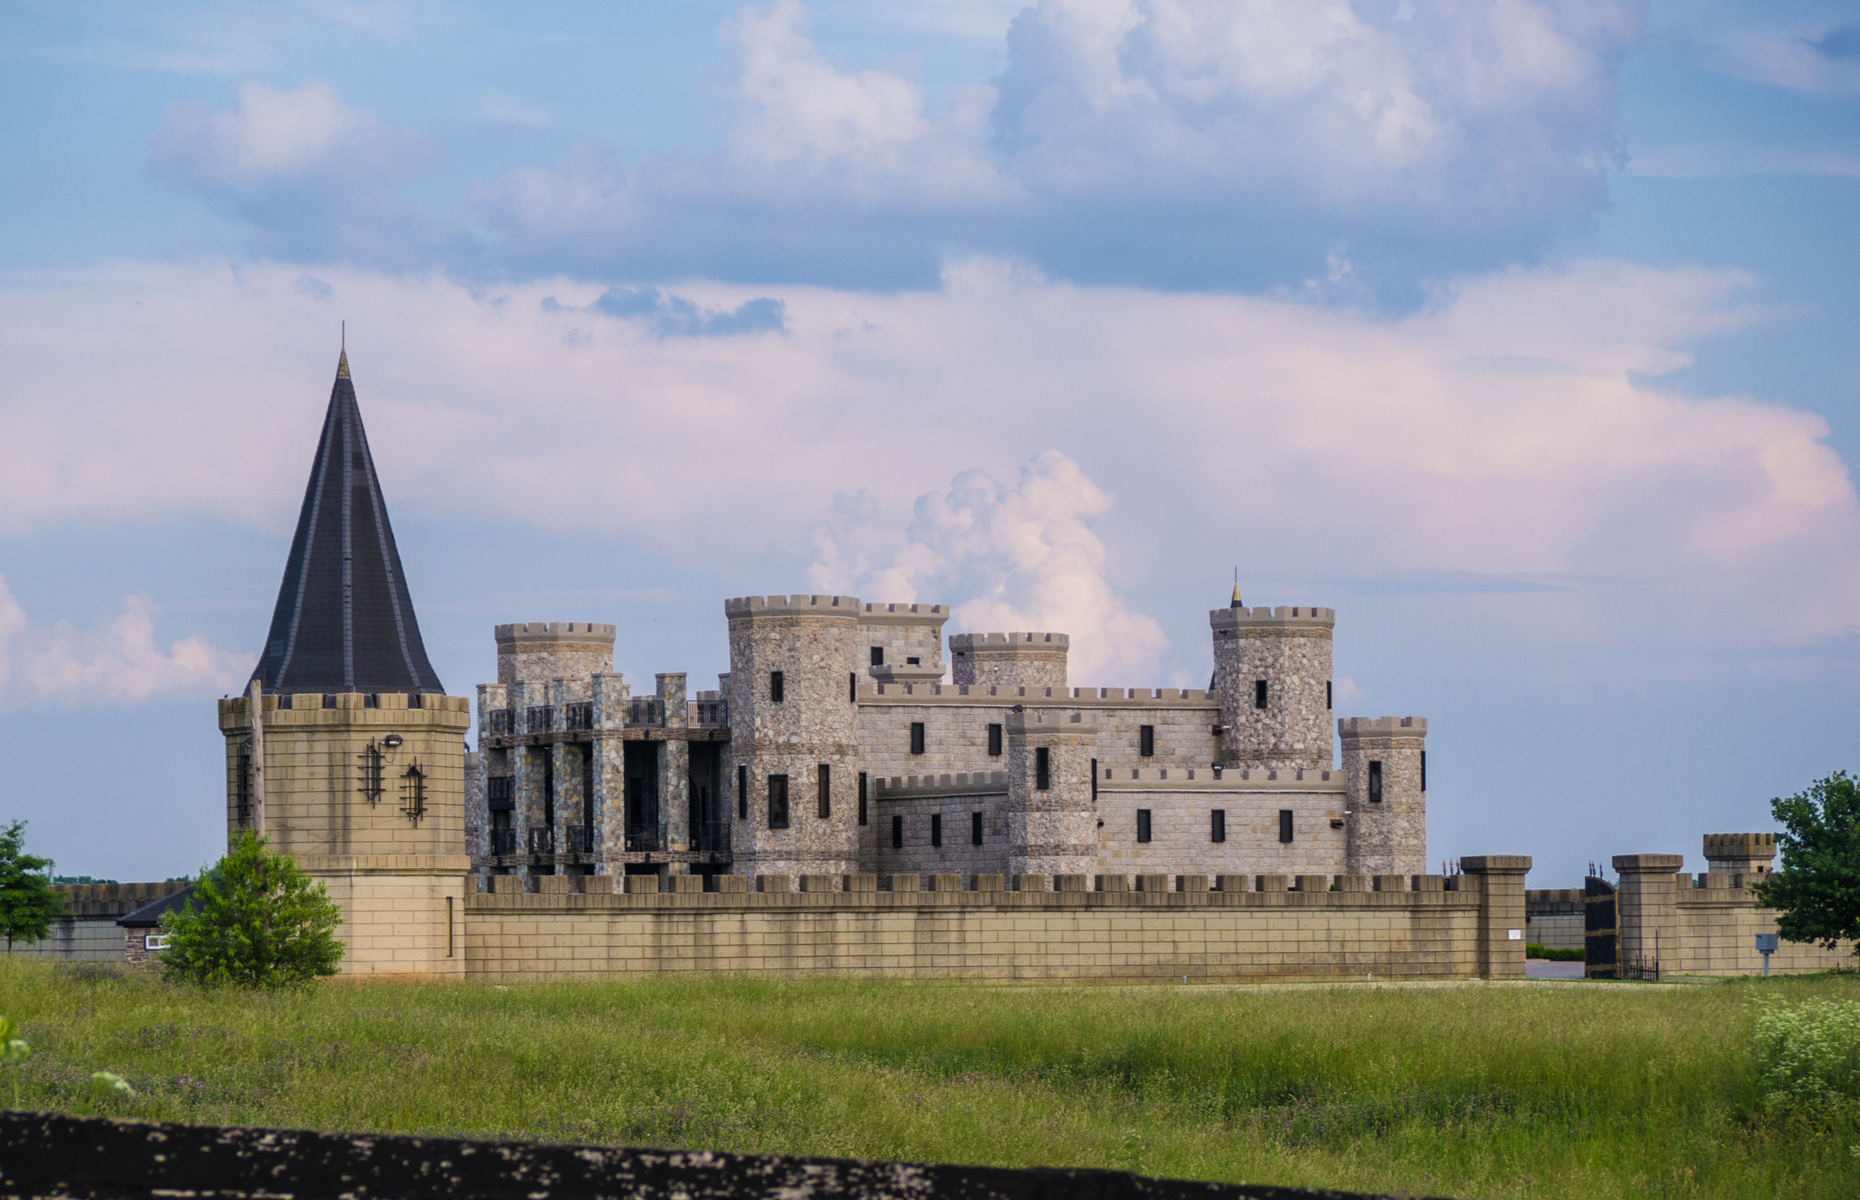 <p class="p1"><span>A castle in Versailles? Must be France, right? Nope, Kentucky. The Martin Castle, or Castle Post, was <a href="http://www.dupontcastle.com/castles/martin.htm" rel="noreferrer noopener"><span>built in 1969 by a real estate developer</span></a> after returning from a trip to Europe where he was inspired by the German castles. It was then purchased in 2004 by a lawyer from Miami, who spent a considerable amount of money rebuilding the house after it caught fire.</span></p>